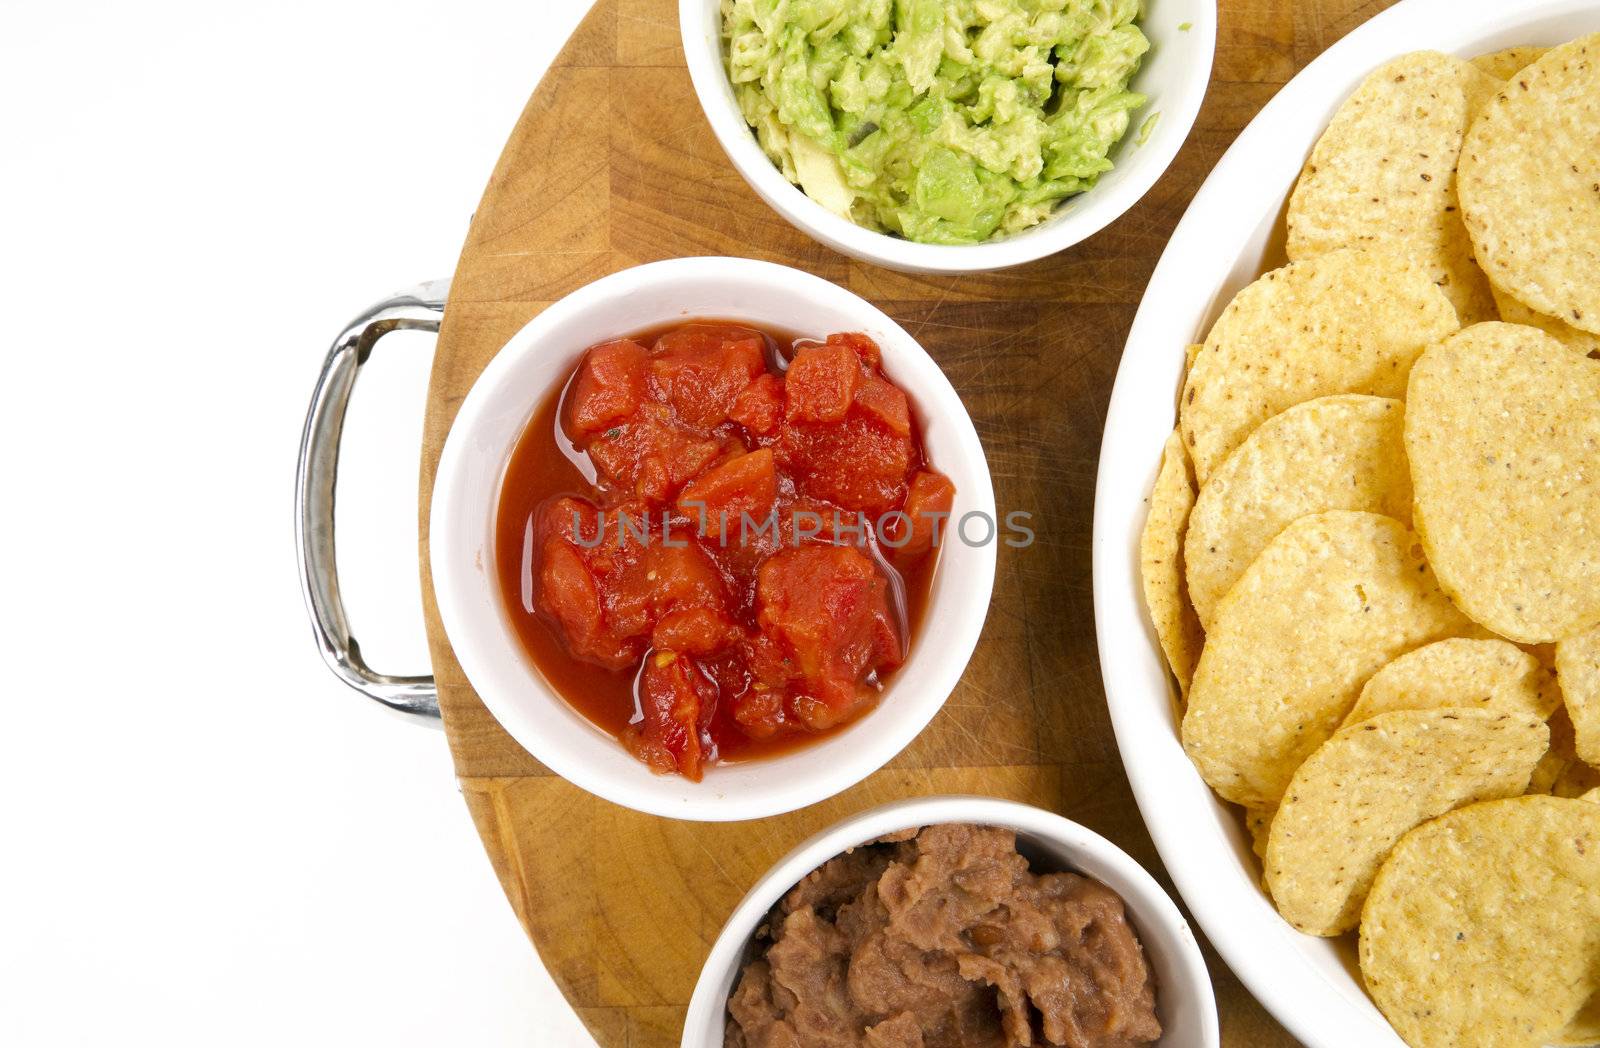 Food Appetizers Chips Salsa Refried Beans Guacamole Wood Cutting by ChrisBoswell